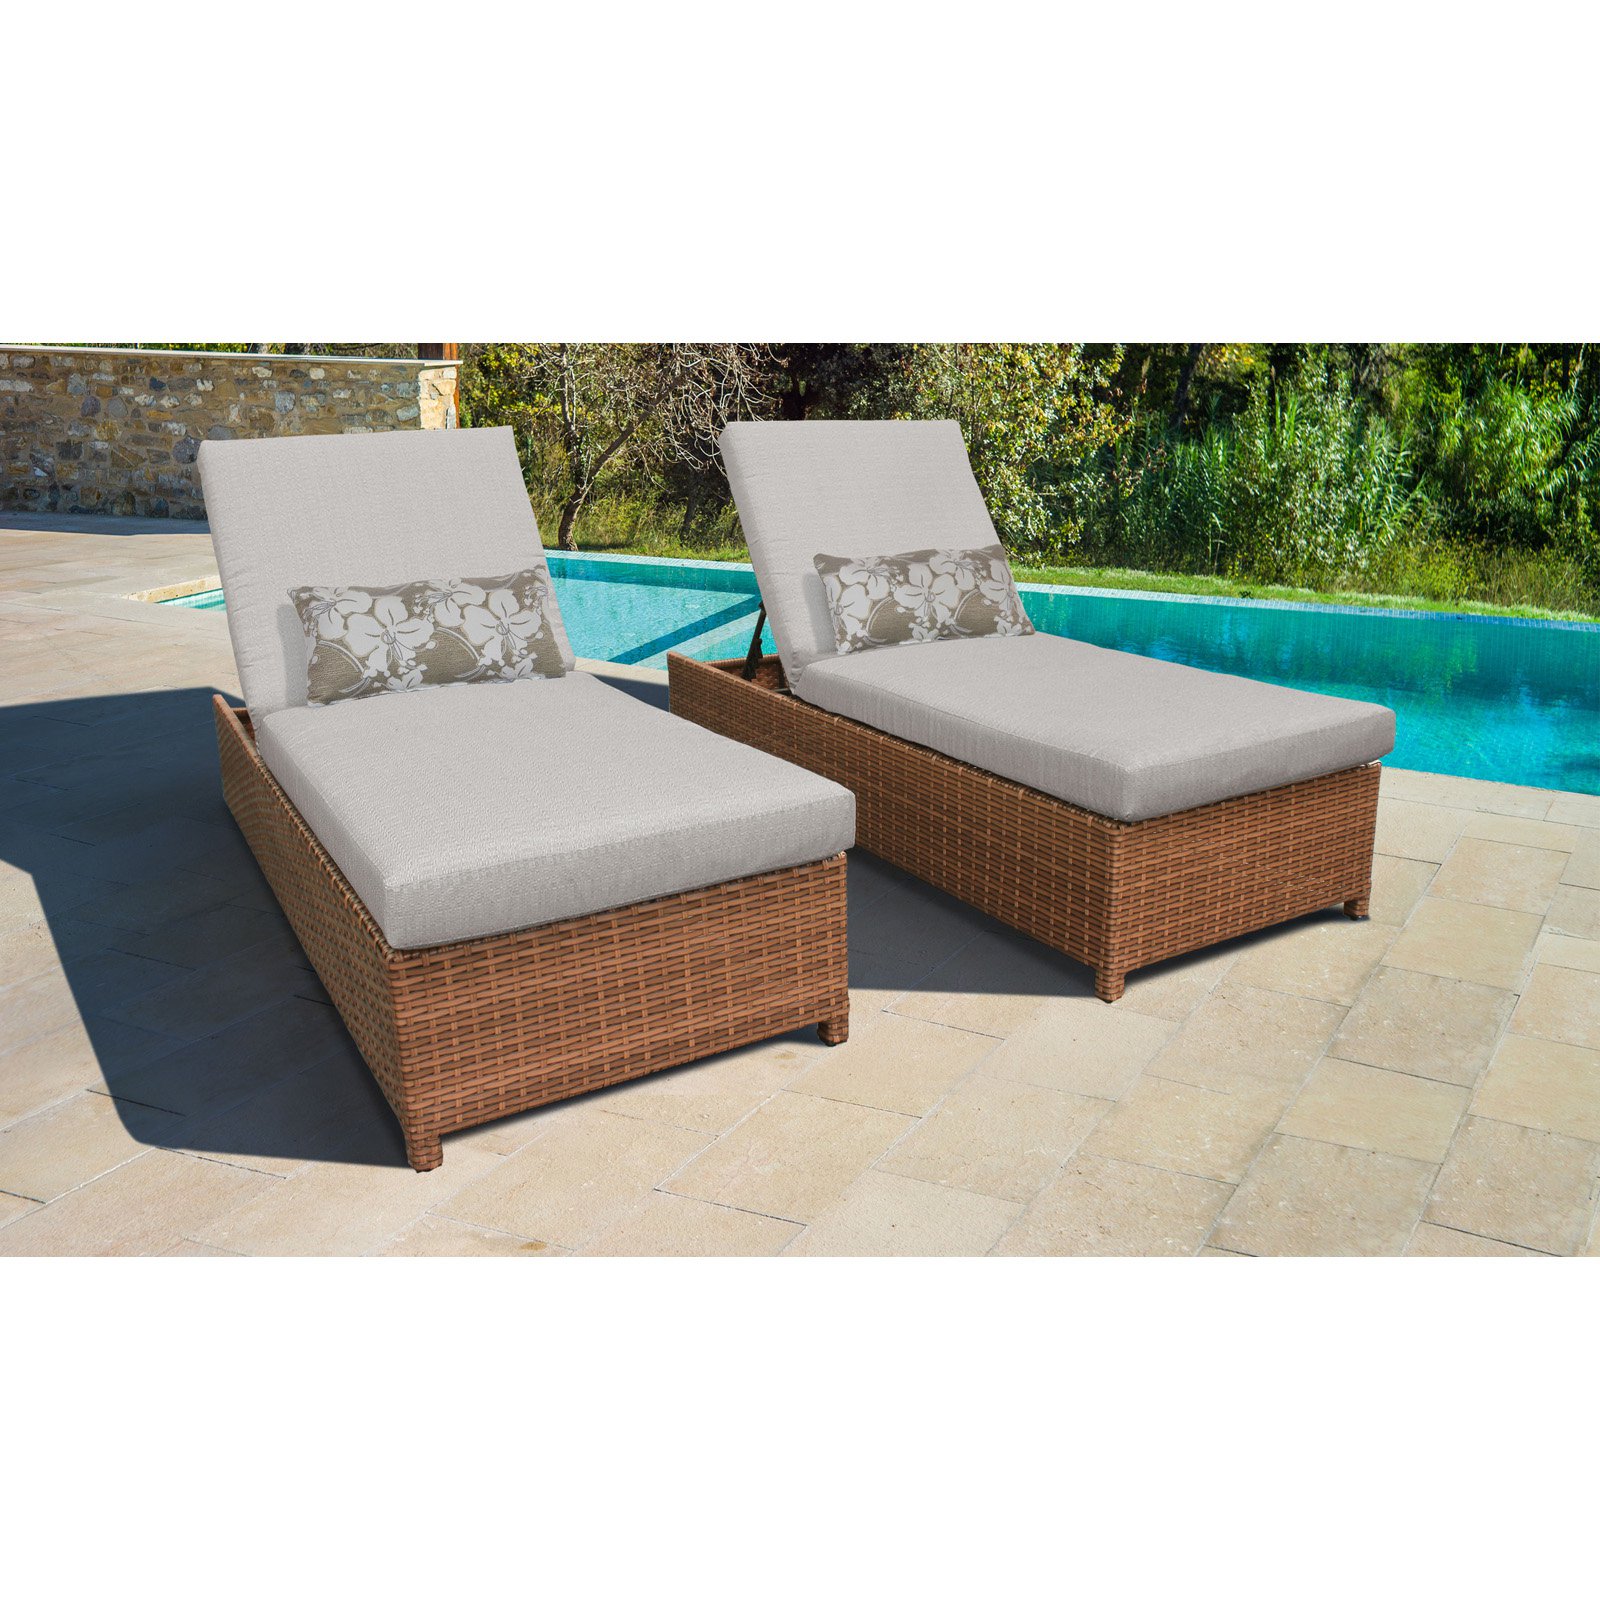 TK Classics Laguna Wheeled Wicker Outdoor Chaise Lounge Chair - Set of 2 - image 4 of 11